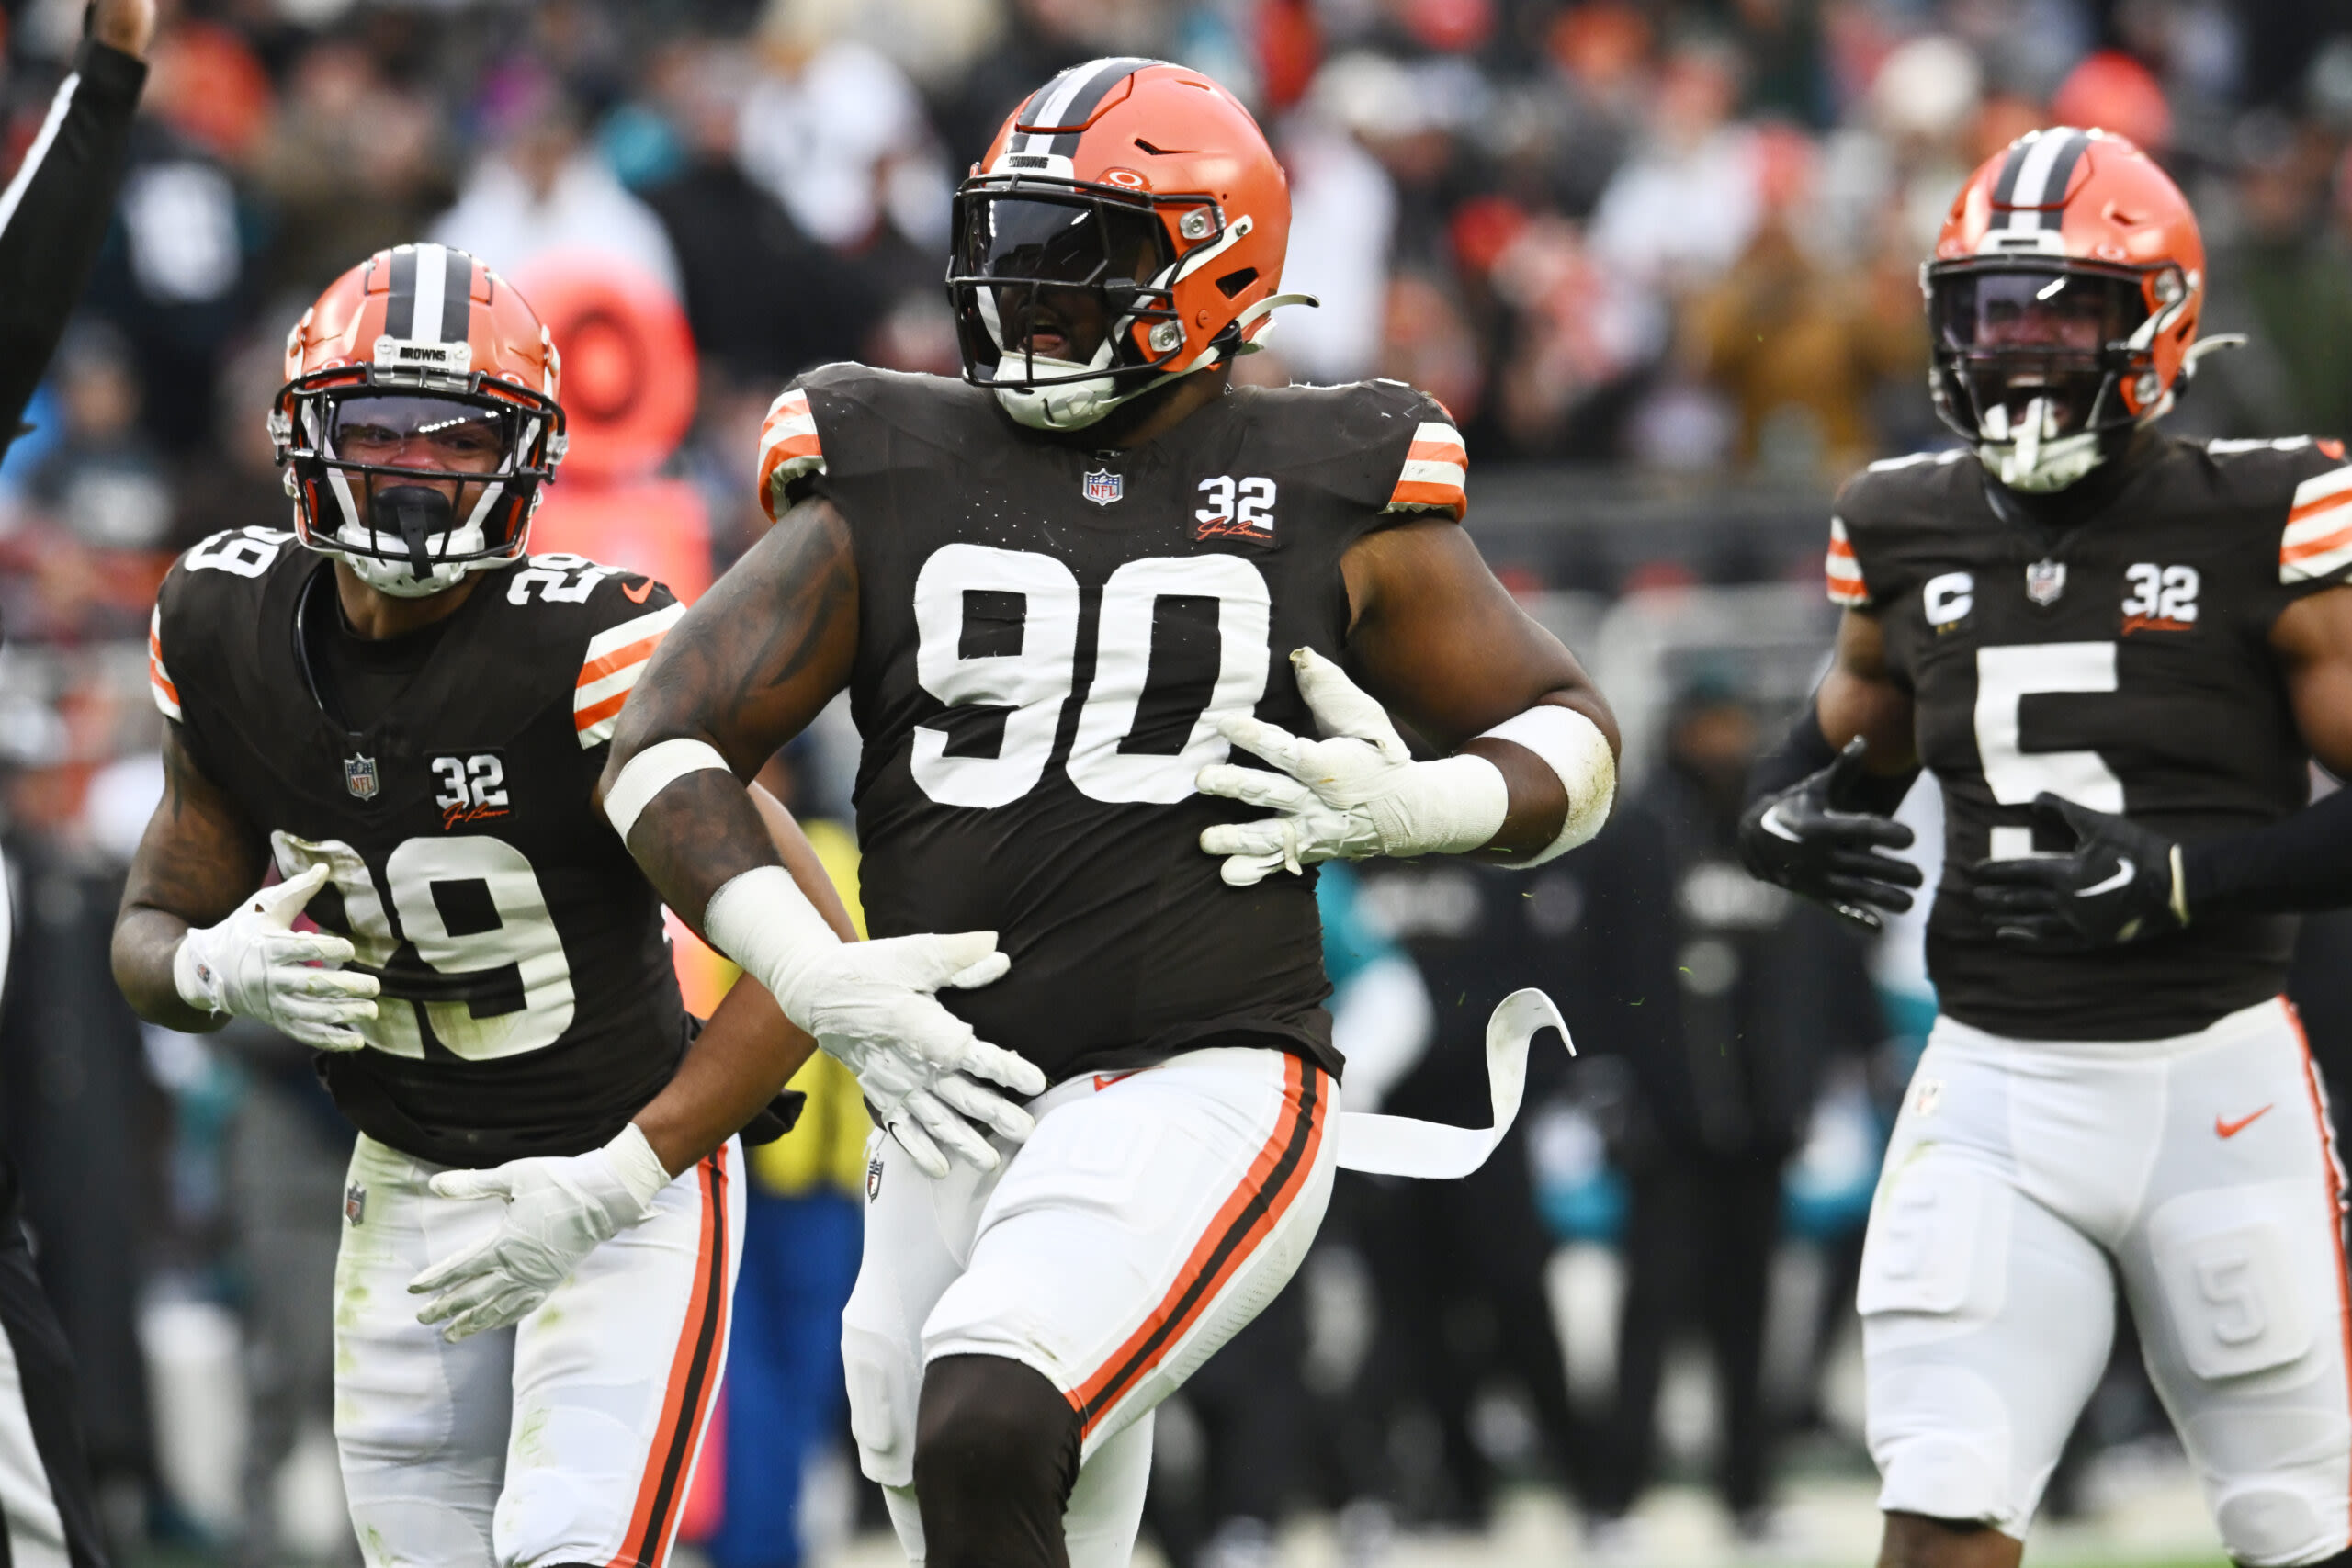 PFF names DT Maurice Hurst II as Browns’ most underrated player